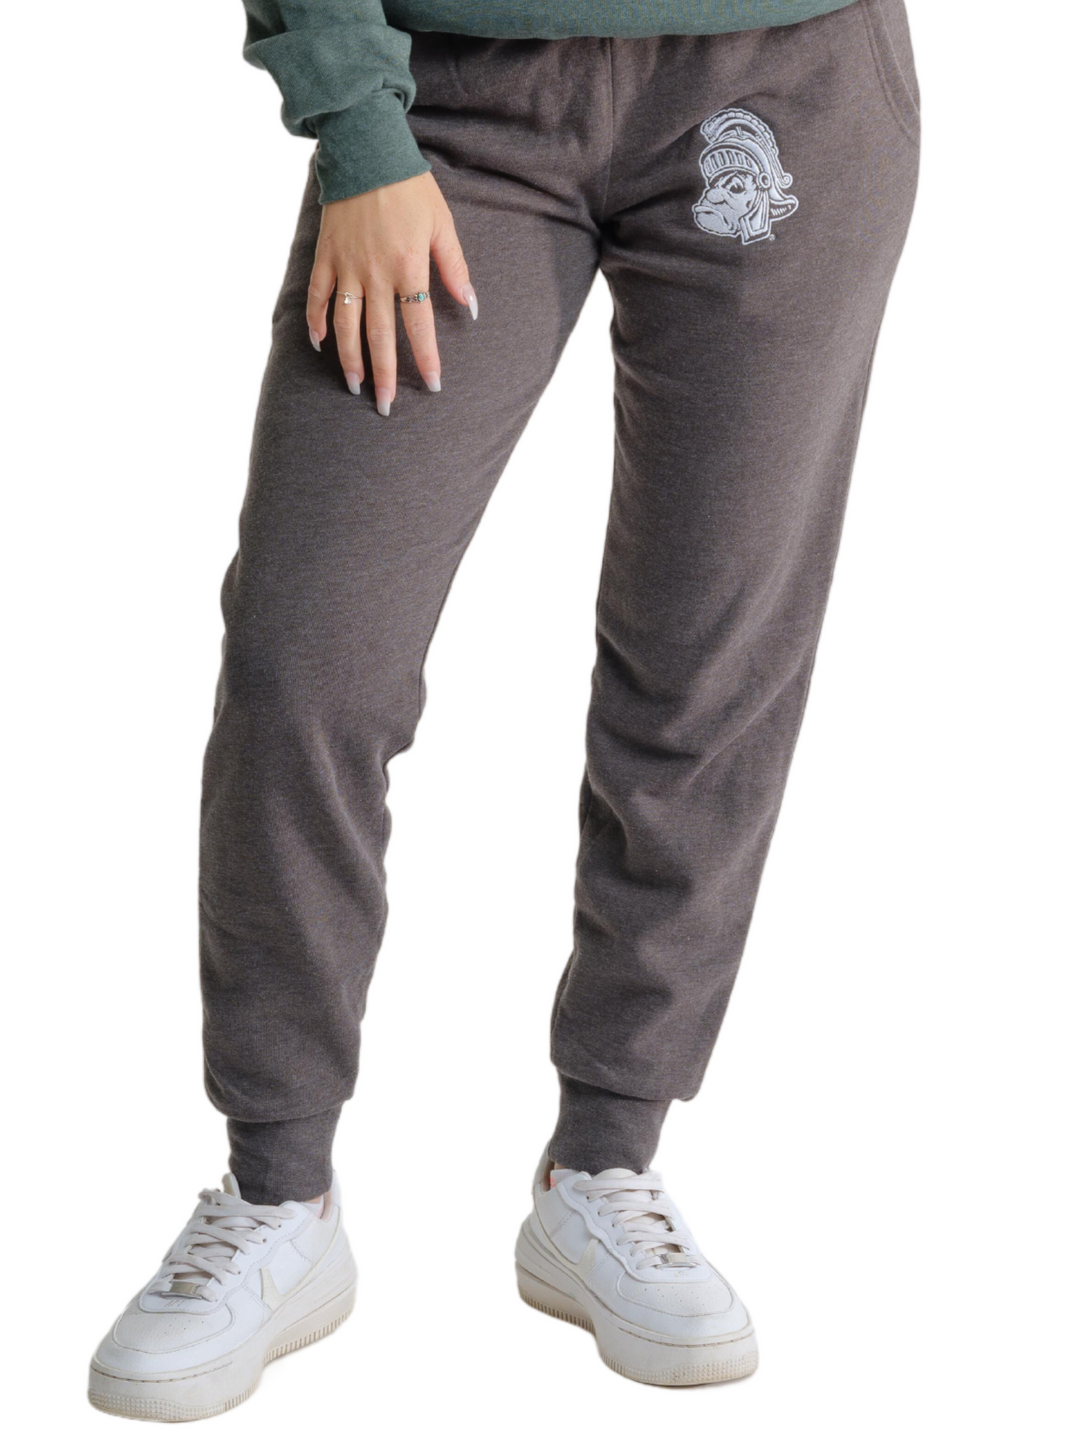 MSU Michigan State Spartans Gruff Sparty Womens Jogging pants sweatpants Joggers